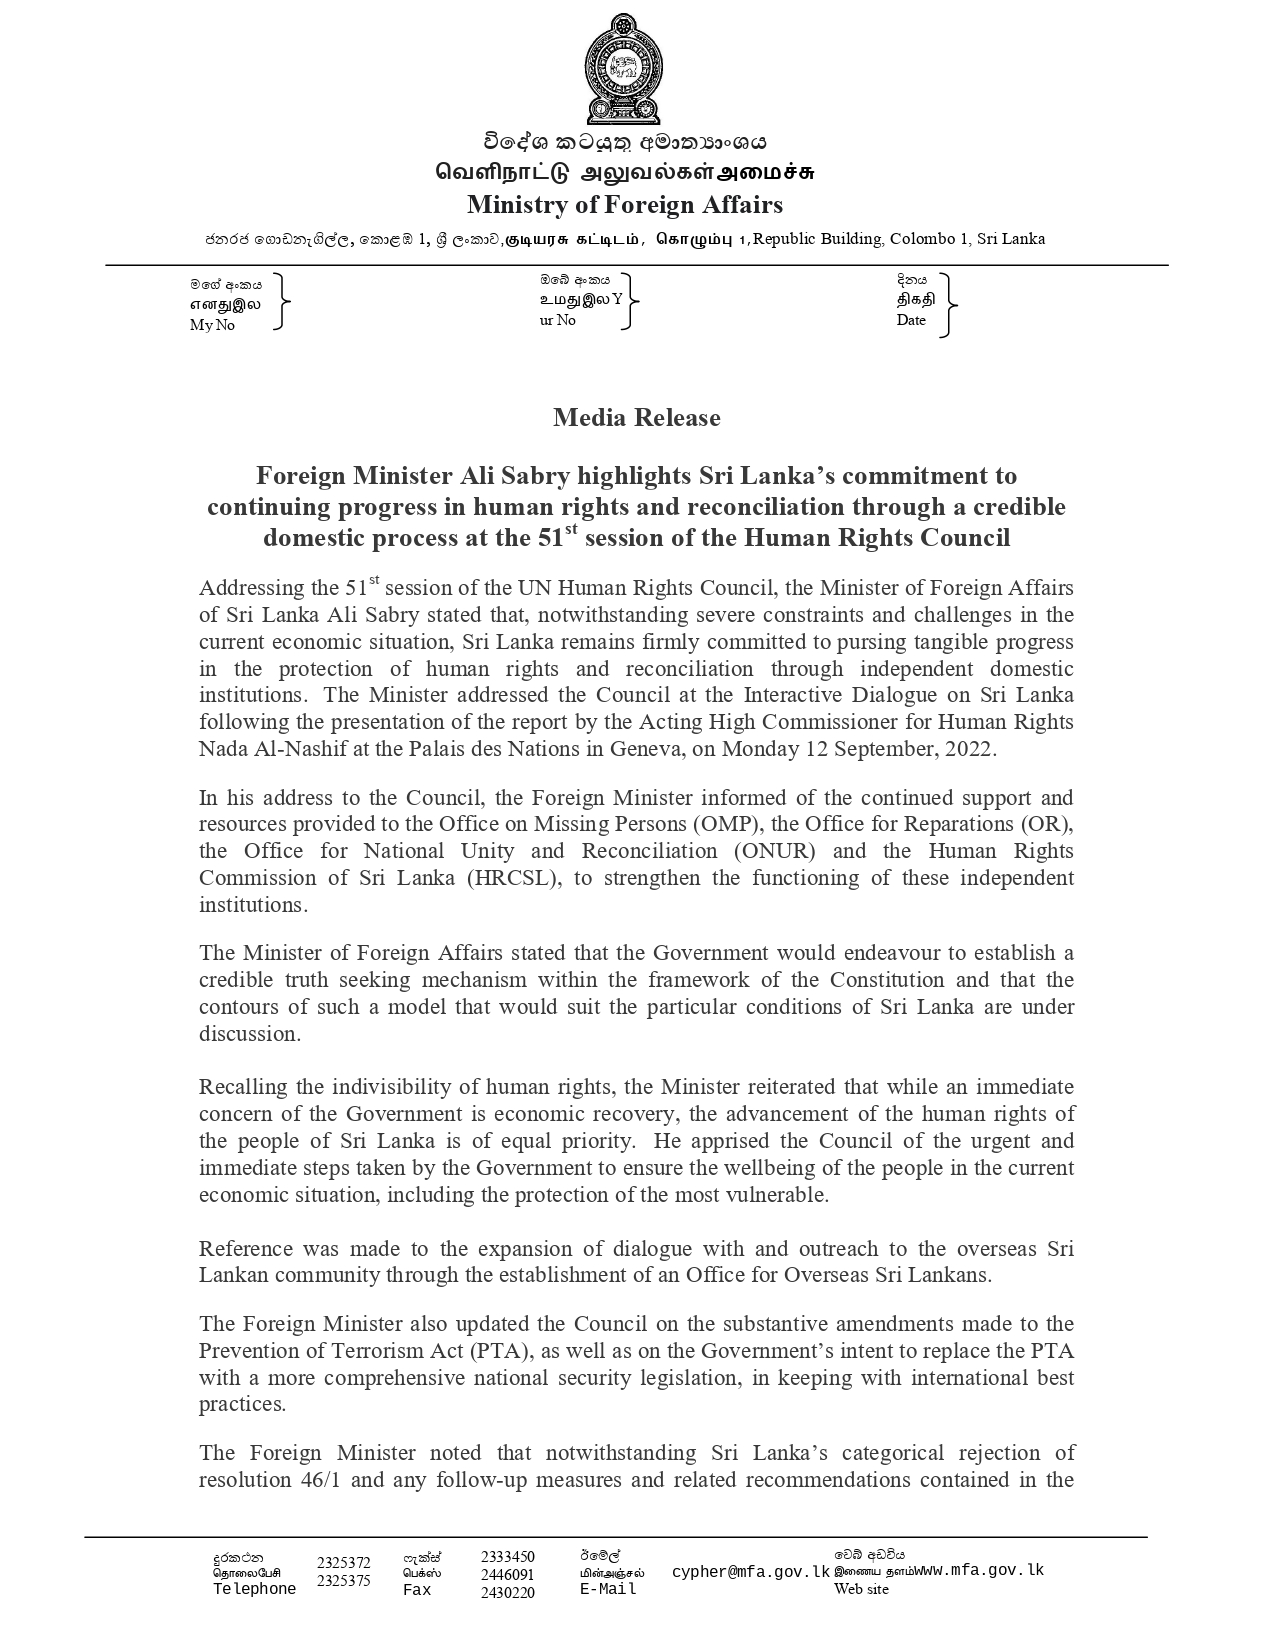 Media Release: Foreign Minister Ali Sabry highlights Sri Lanka's commitment to continuing progress in human rights and reconciliation through a credible domestic process at the 51st session of the Human Rights Council